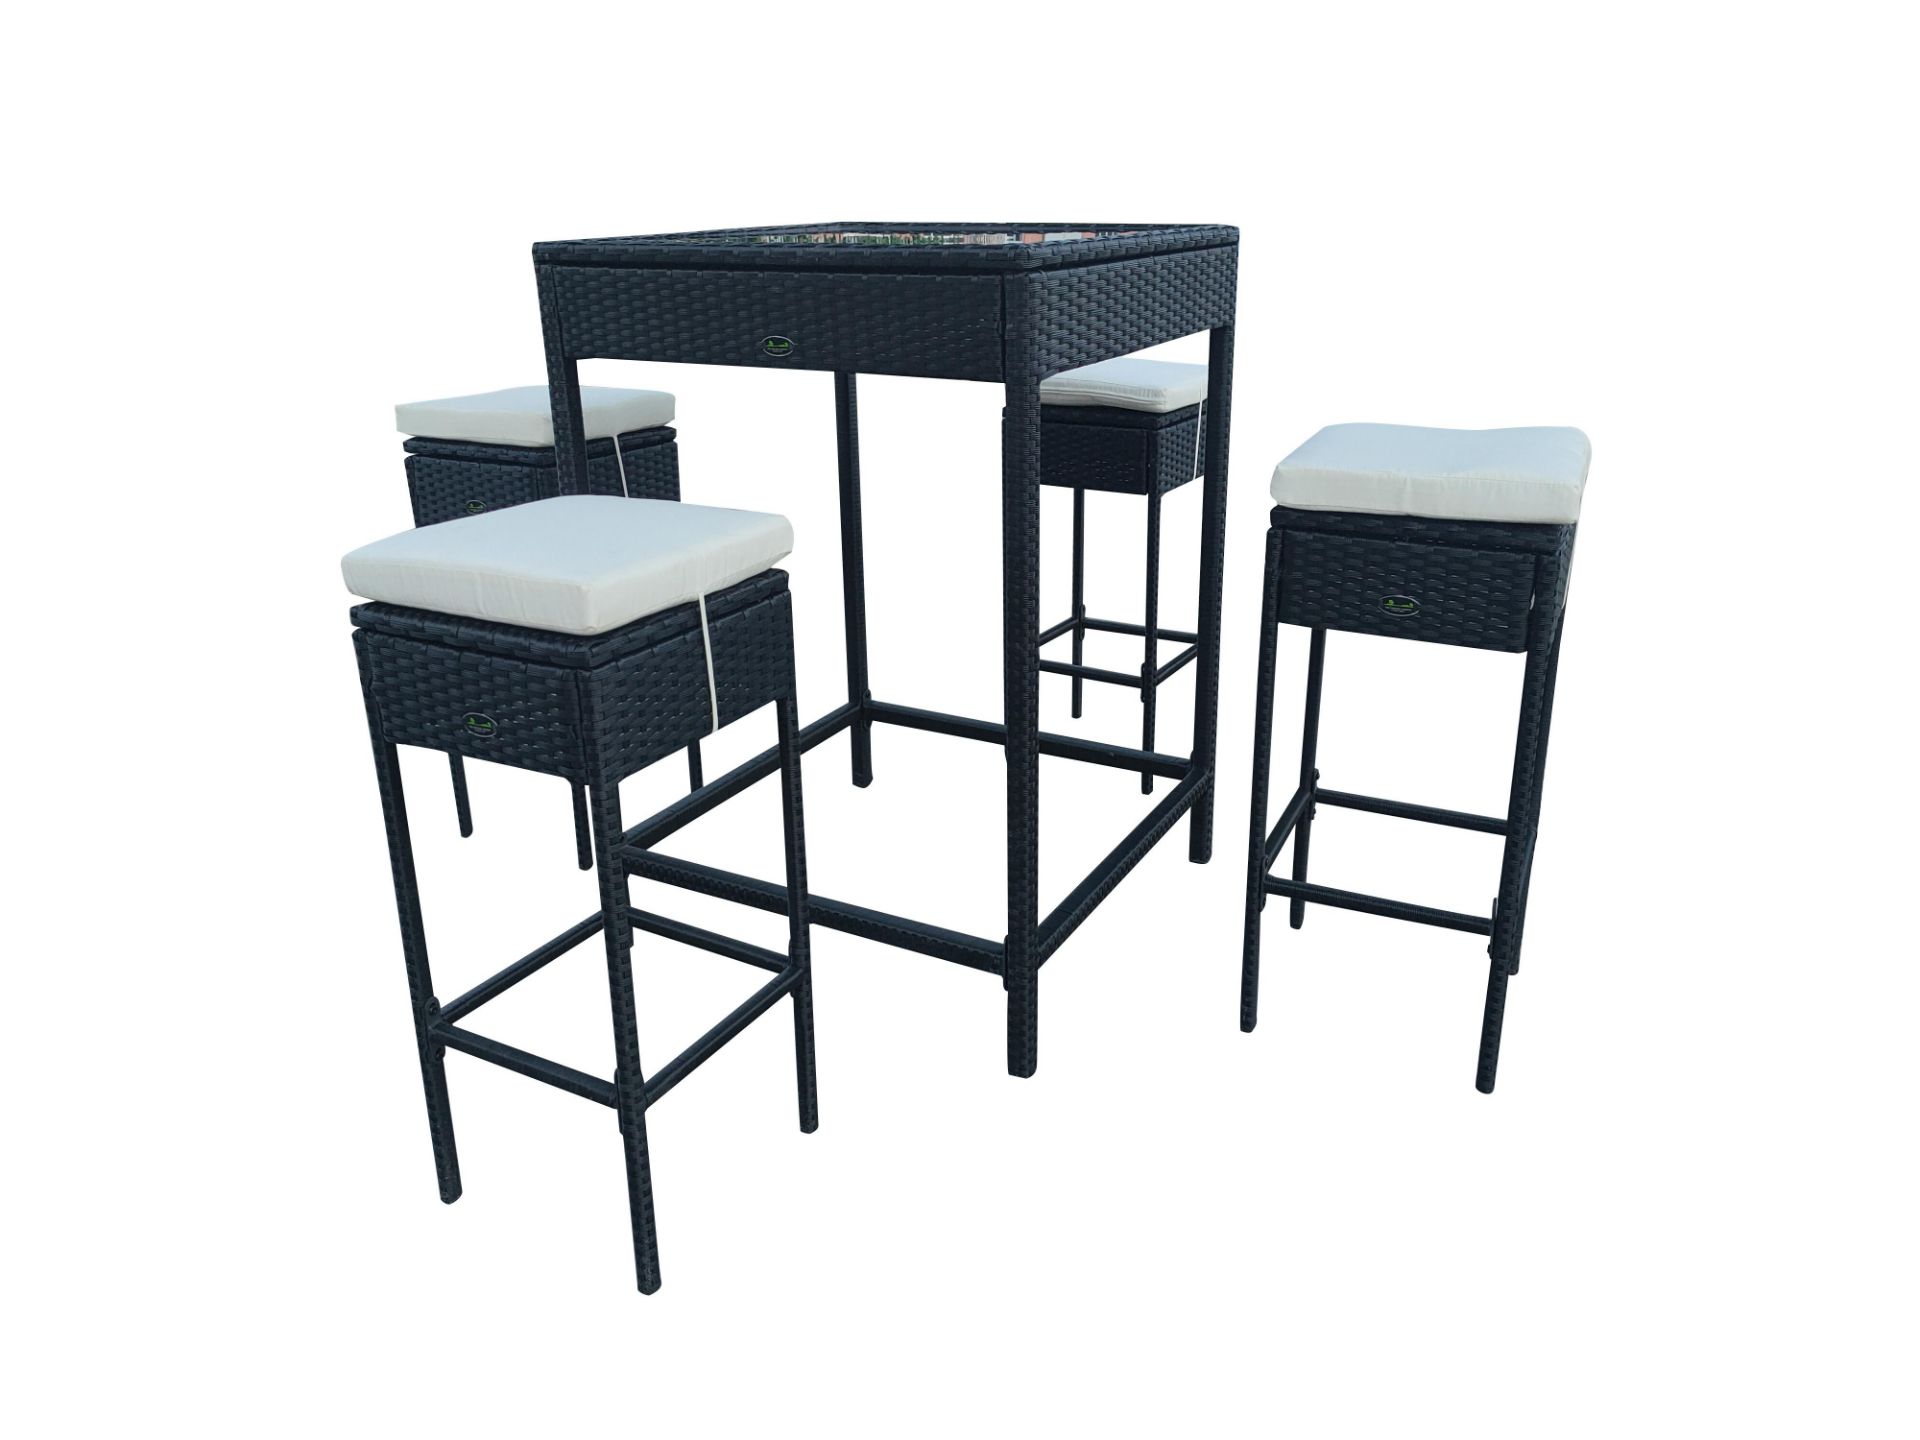 + VAT Brand New Chelsea Garden Company Brown Rattan Four Person Bar Stool And Table Set - Item Is - Image 4 of 4